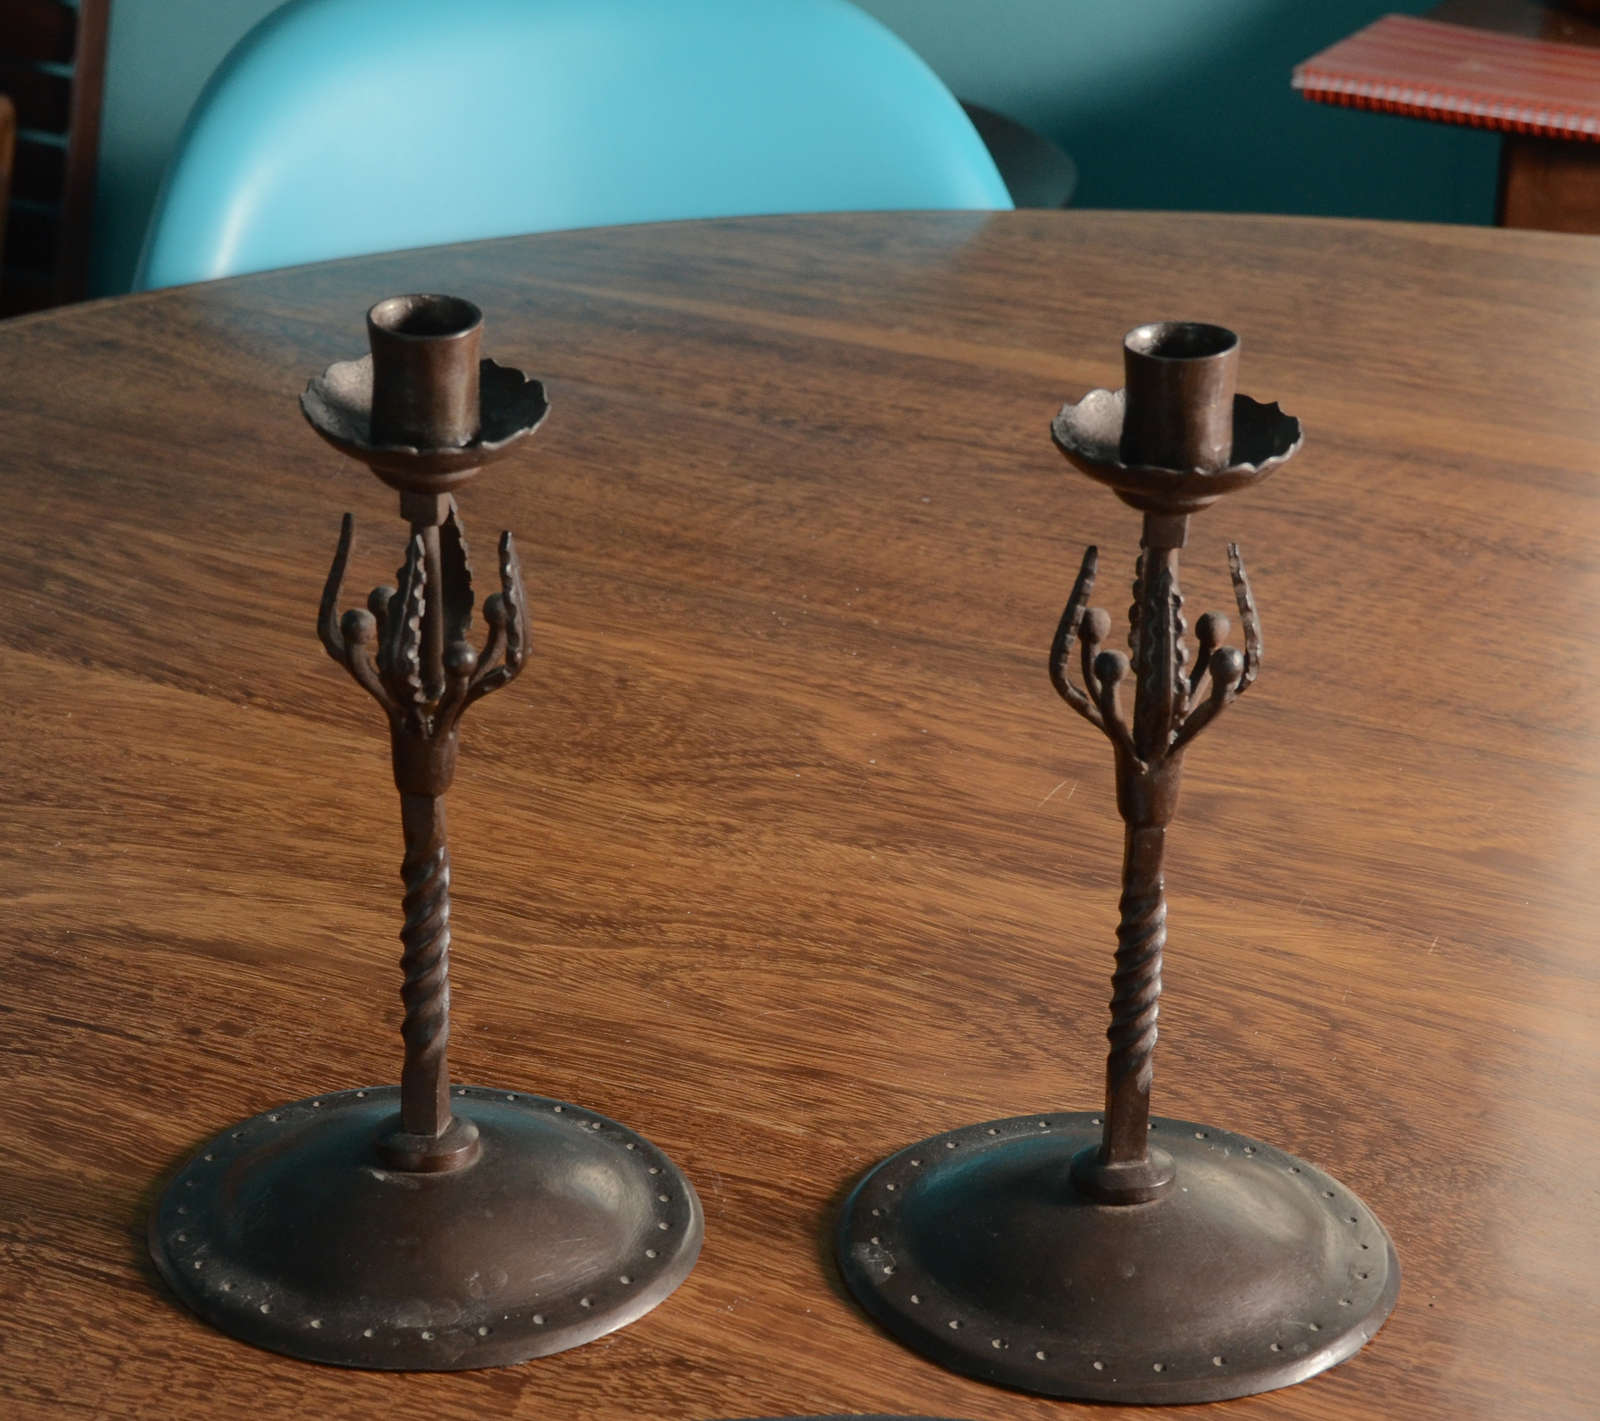 Pair of Wrought Iron Candleticks with domed base, twisted shaft rising to Leaf & Pod ornament.  Candle Holder is rimmed with ogee forms.  Fine example of English Arts & Crafts designed by Edward Spencer for The Artificer's Guild, circa 1910.  Great